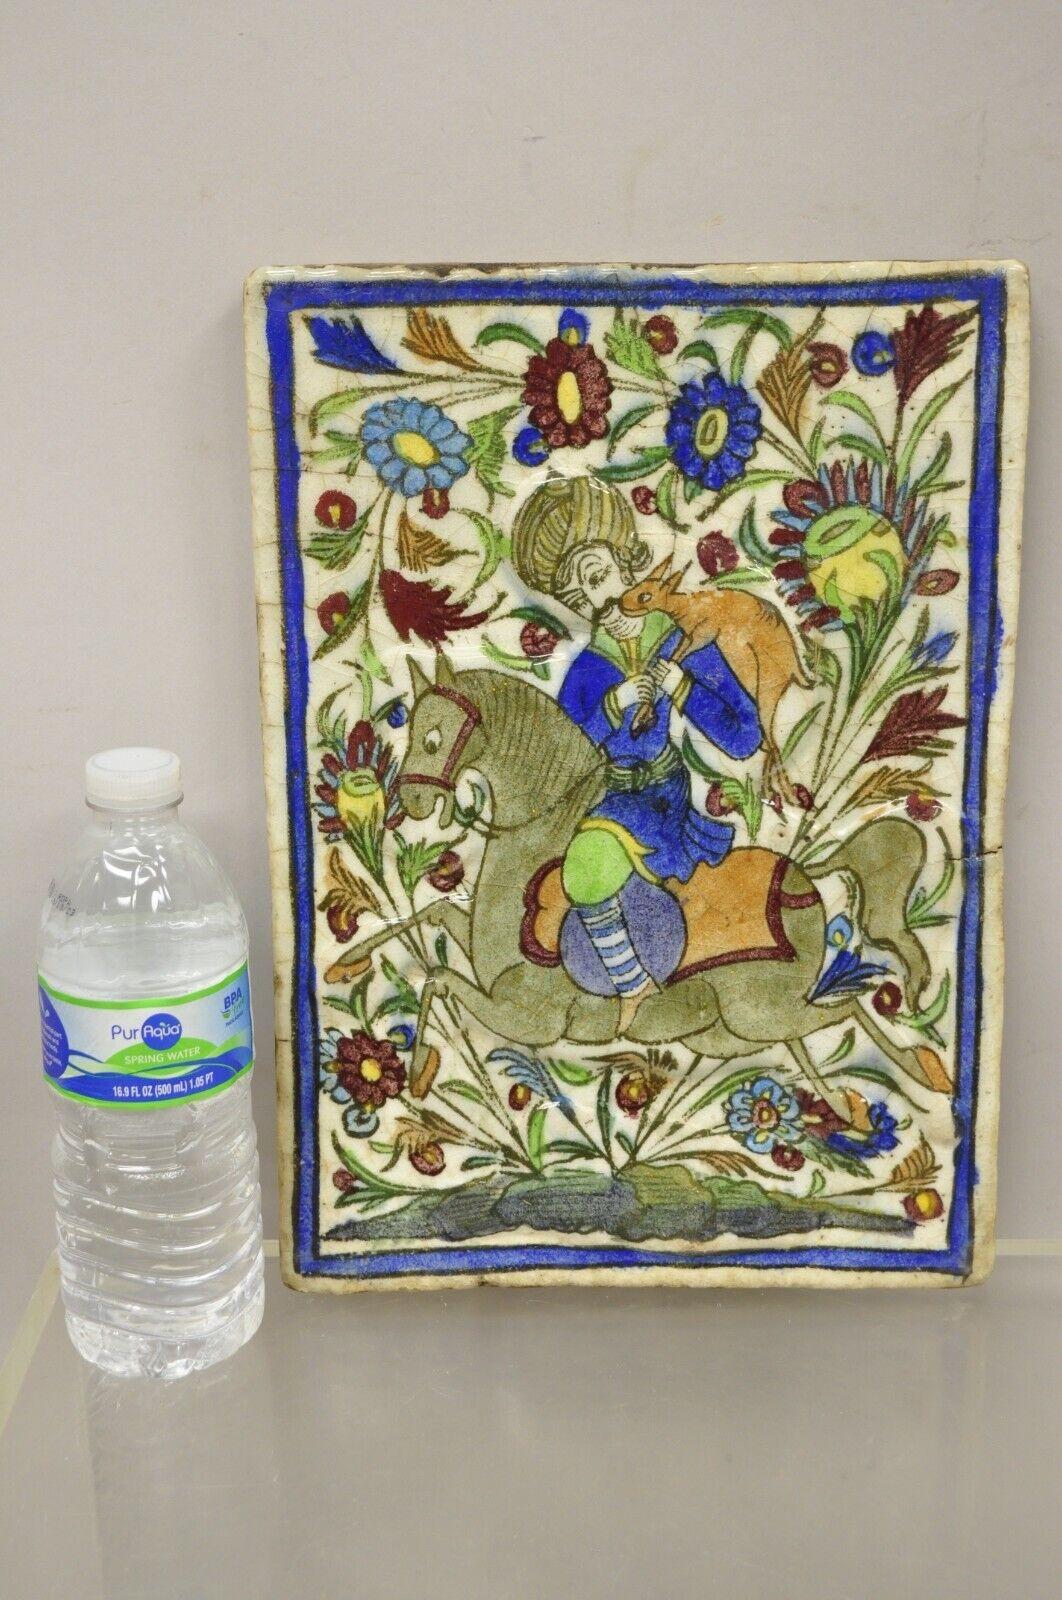 Antique Persian Iznik Qajar Style Ceramic Pottery Tile Horse Rider Hunt Scene (B) - C1. Item features an original crackle glazed finish, heavy ceramic pottery construction, very impressive detail, wonderful style and form. Great to mount as wall art